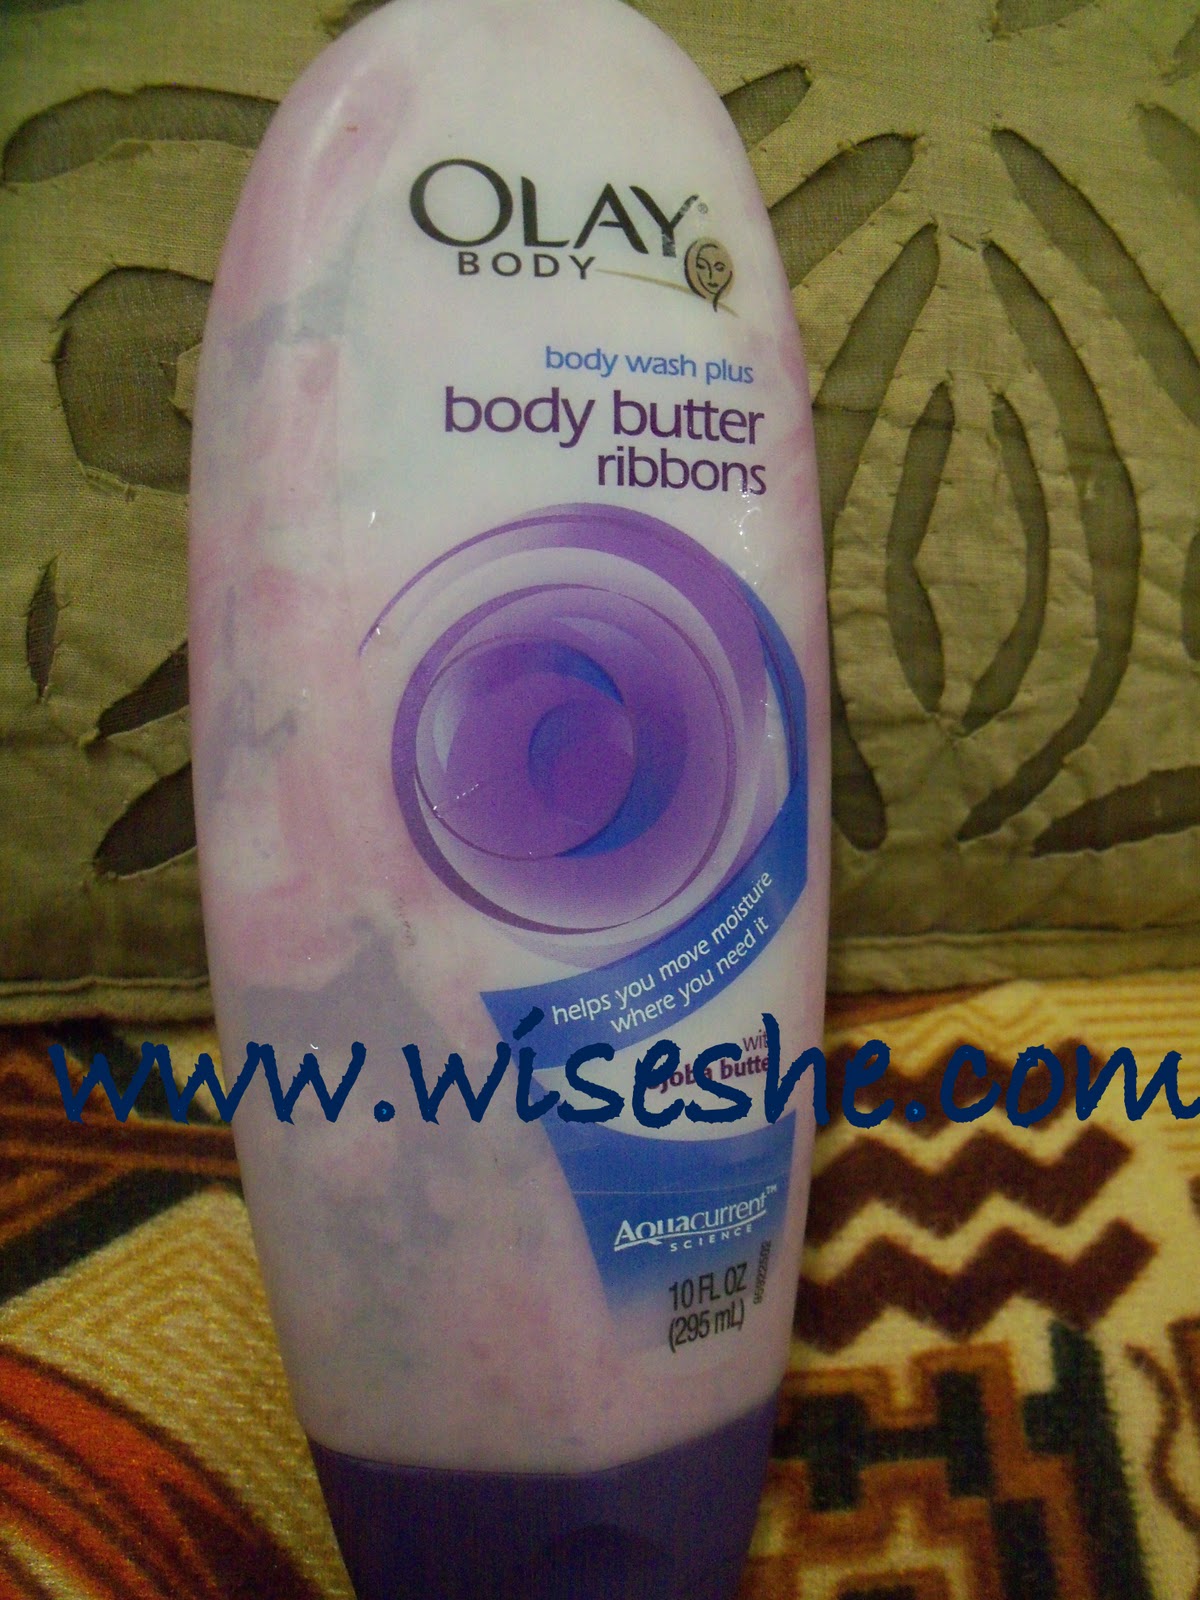 Olay body wash plus body butter ribbons with jojoba butter